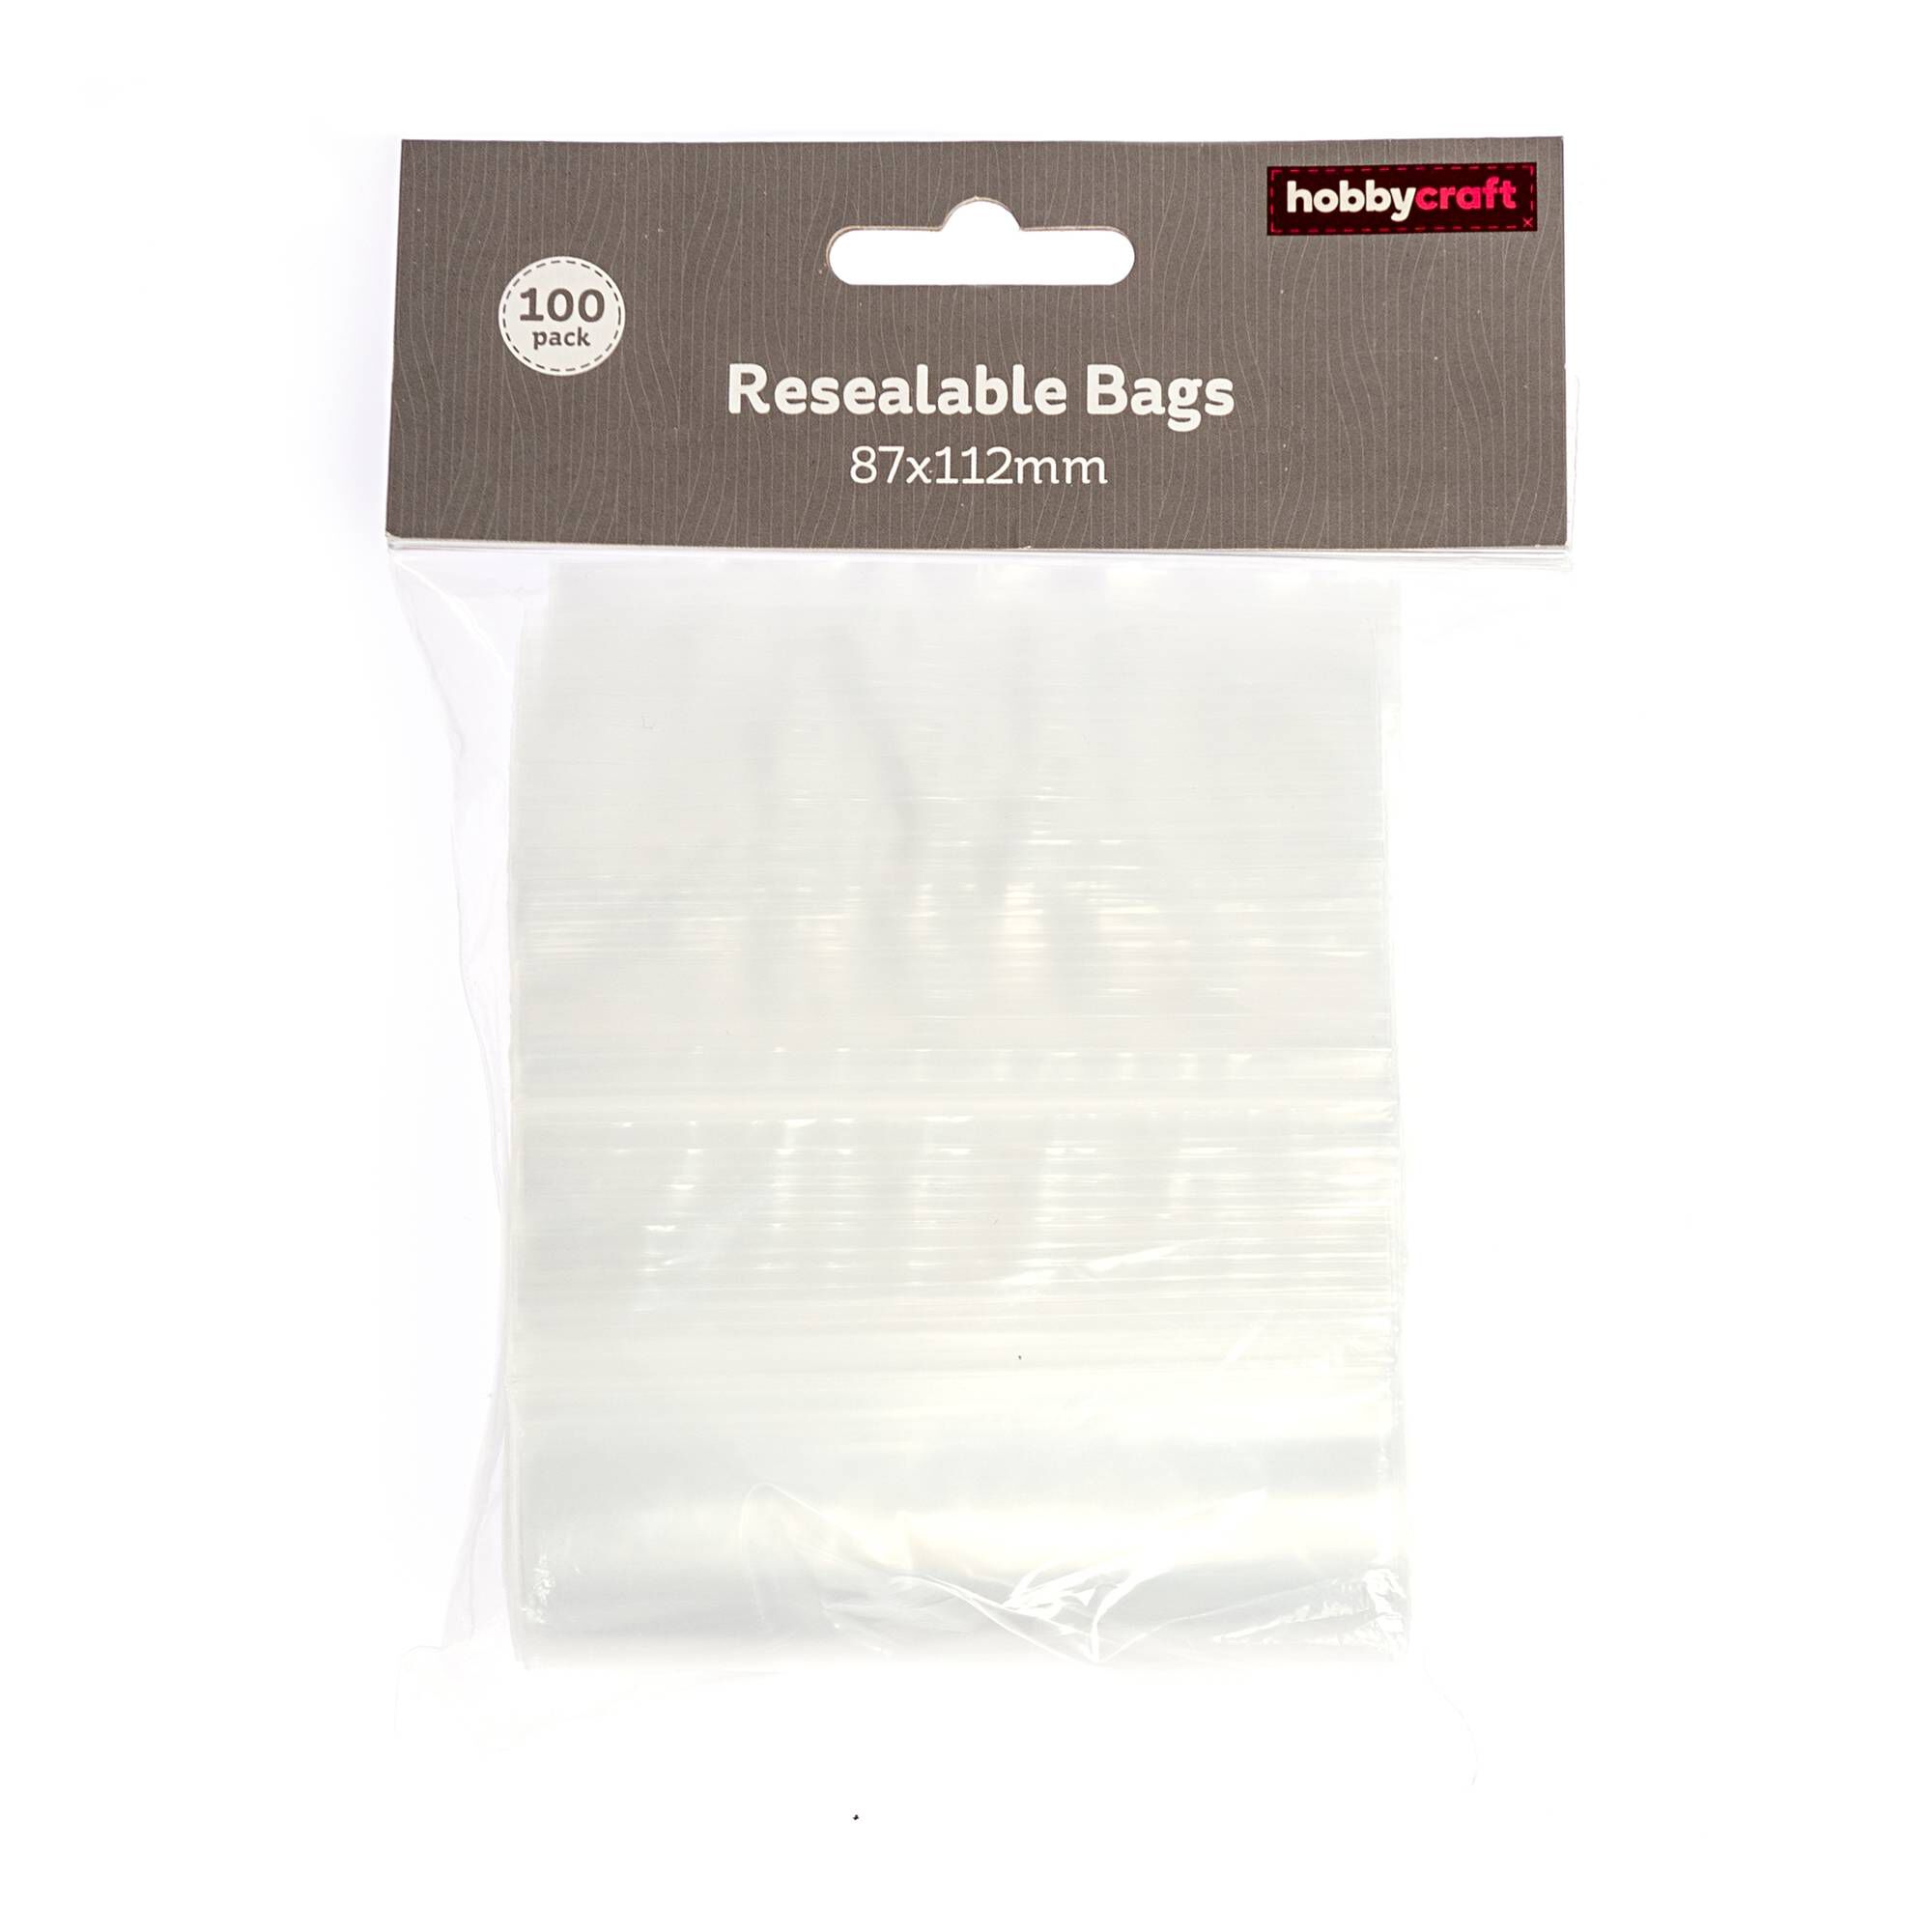 668256 1000 1 hobbycraft resealable jewellery bag clear large